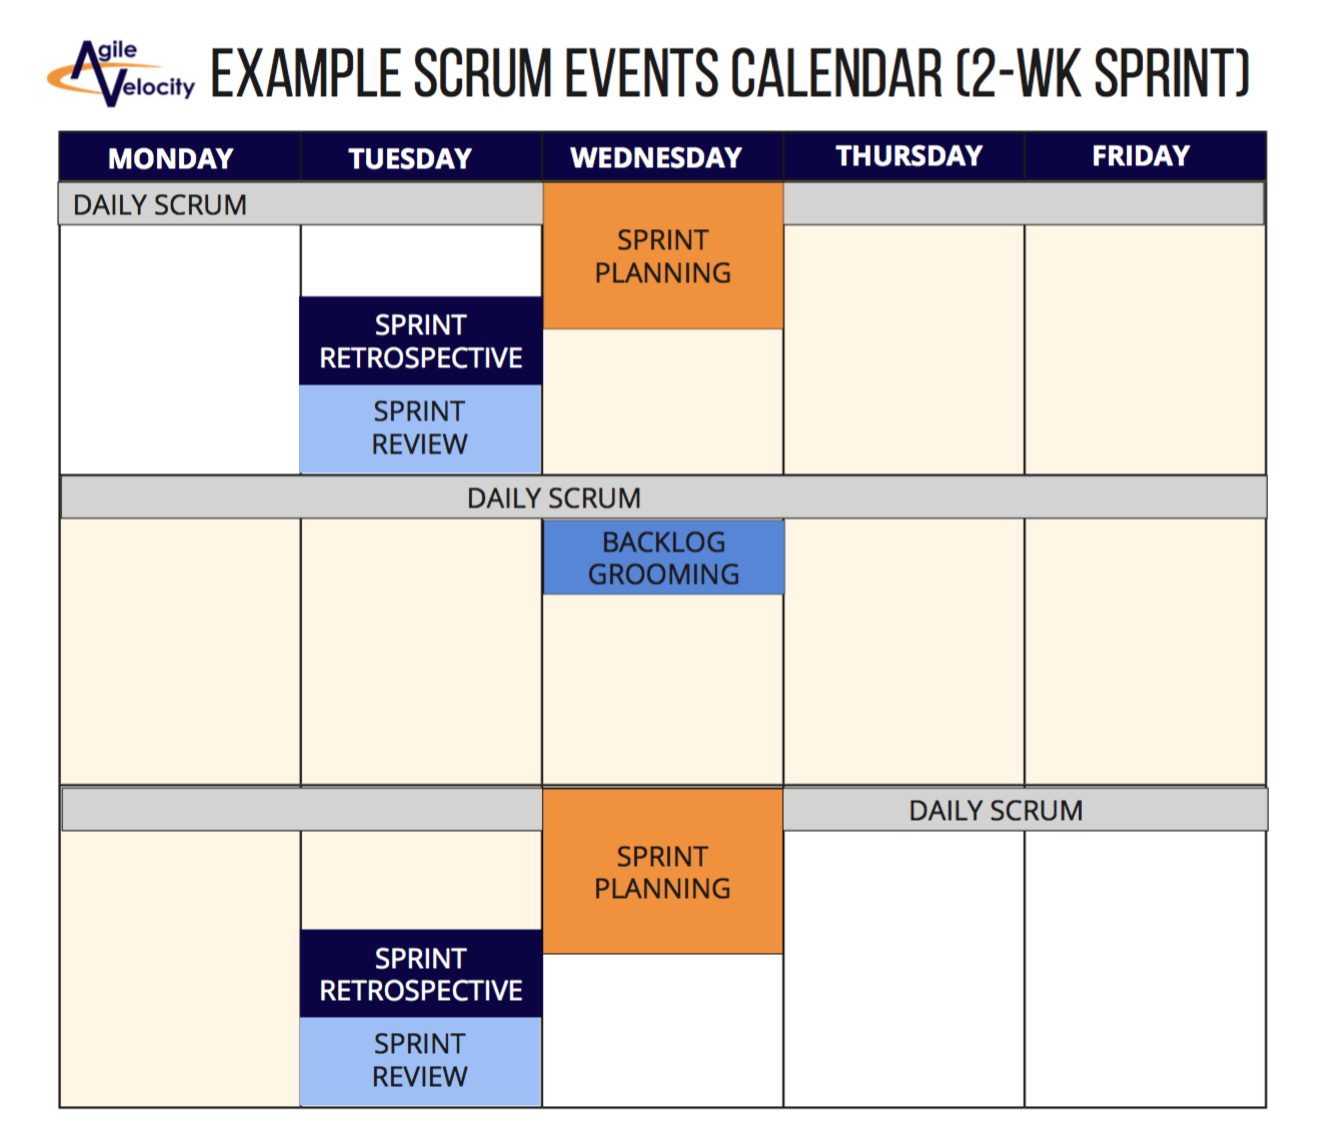 practical-guidelines-for-scheduling-scrum-events-agile-velocity